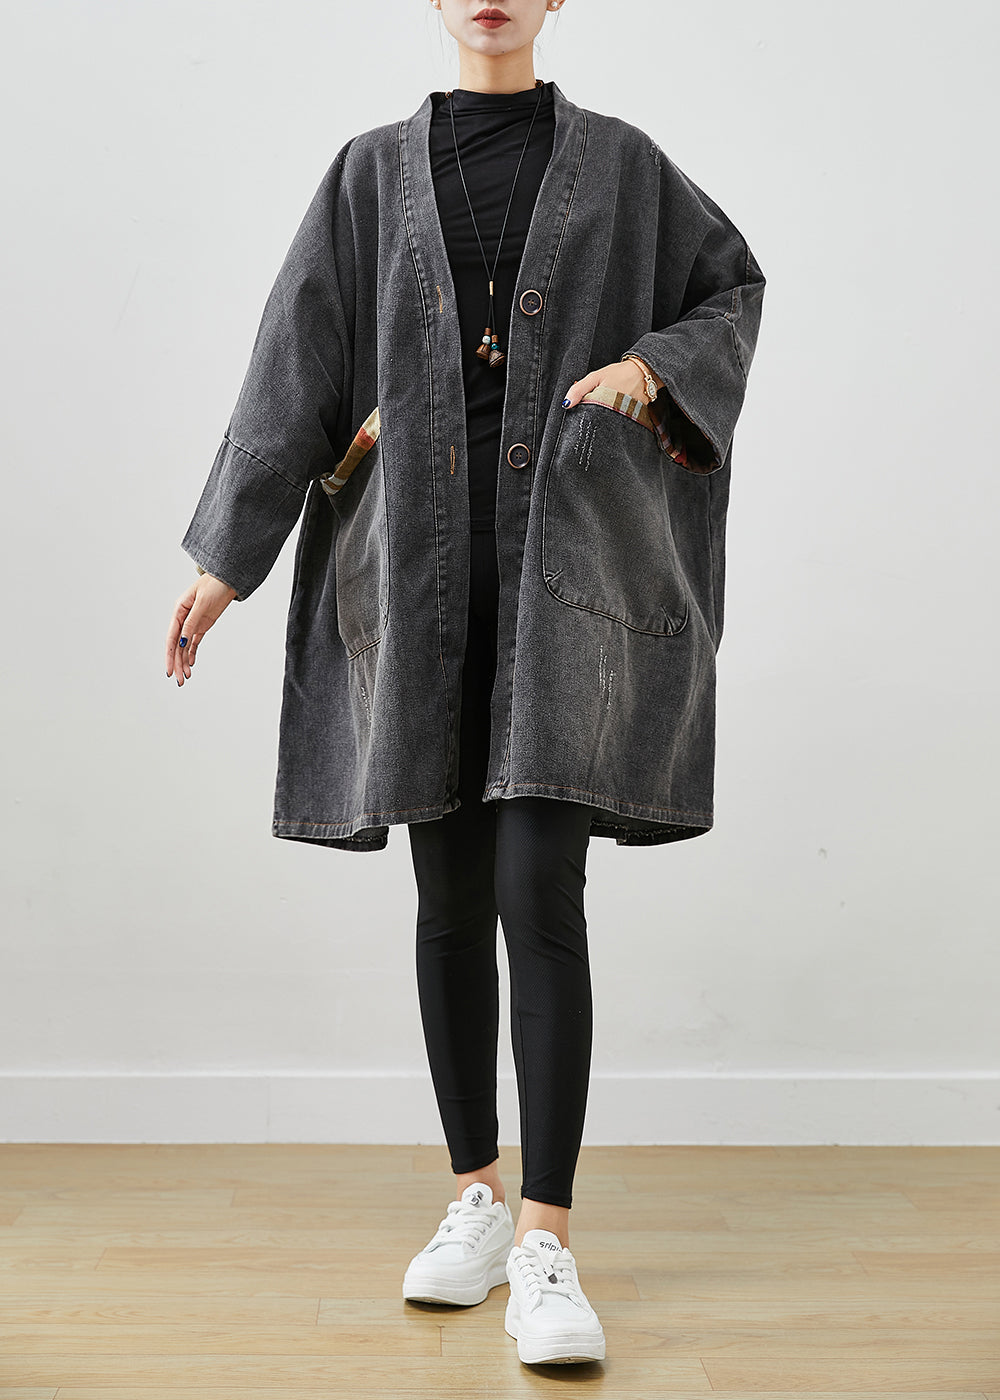 Black Patchwork Denim Trench Coat Outwear Oversized Fall